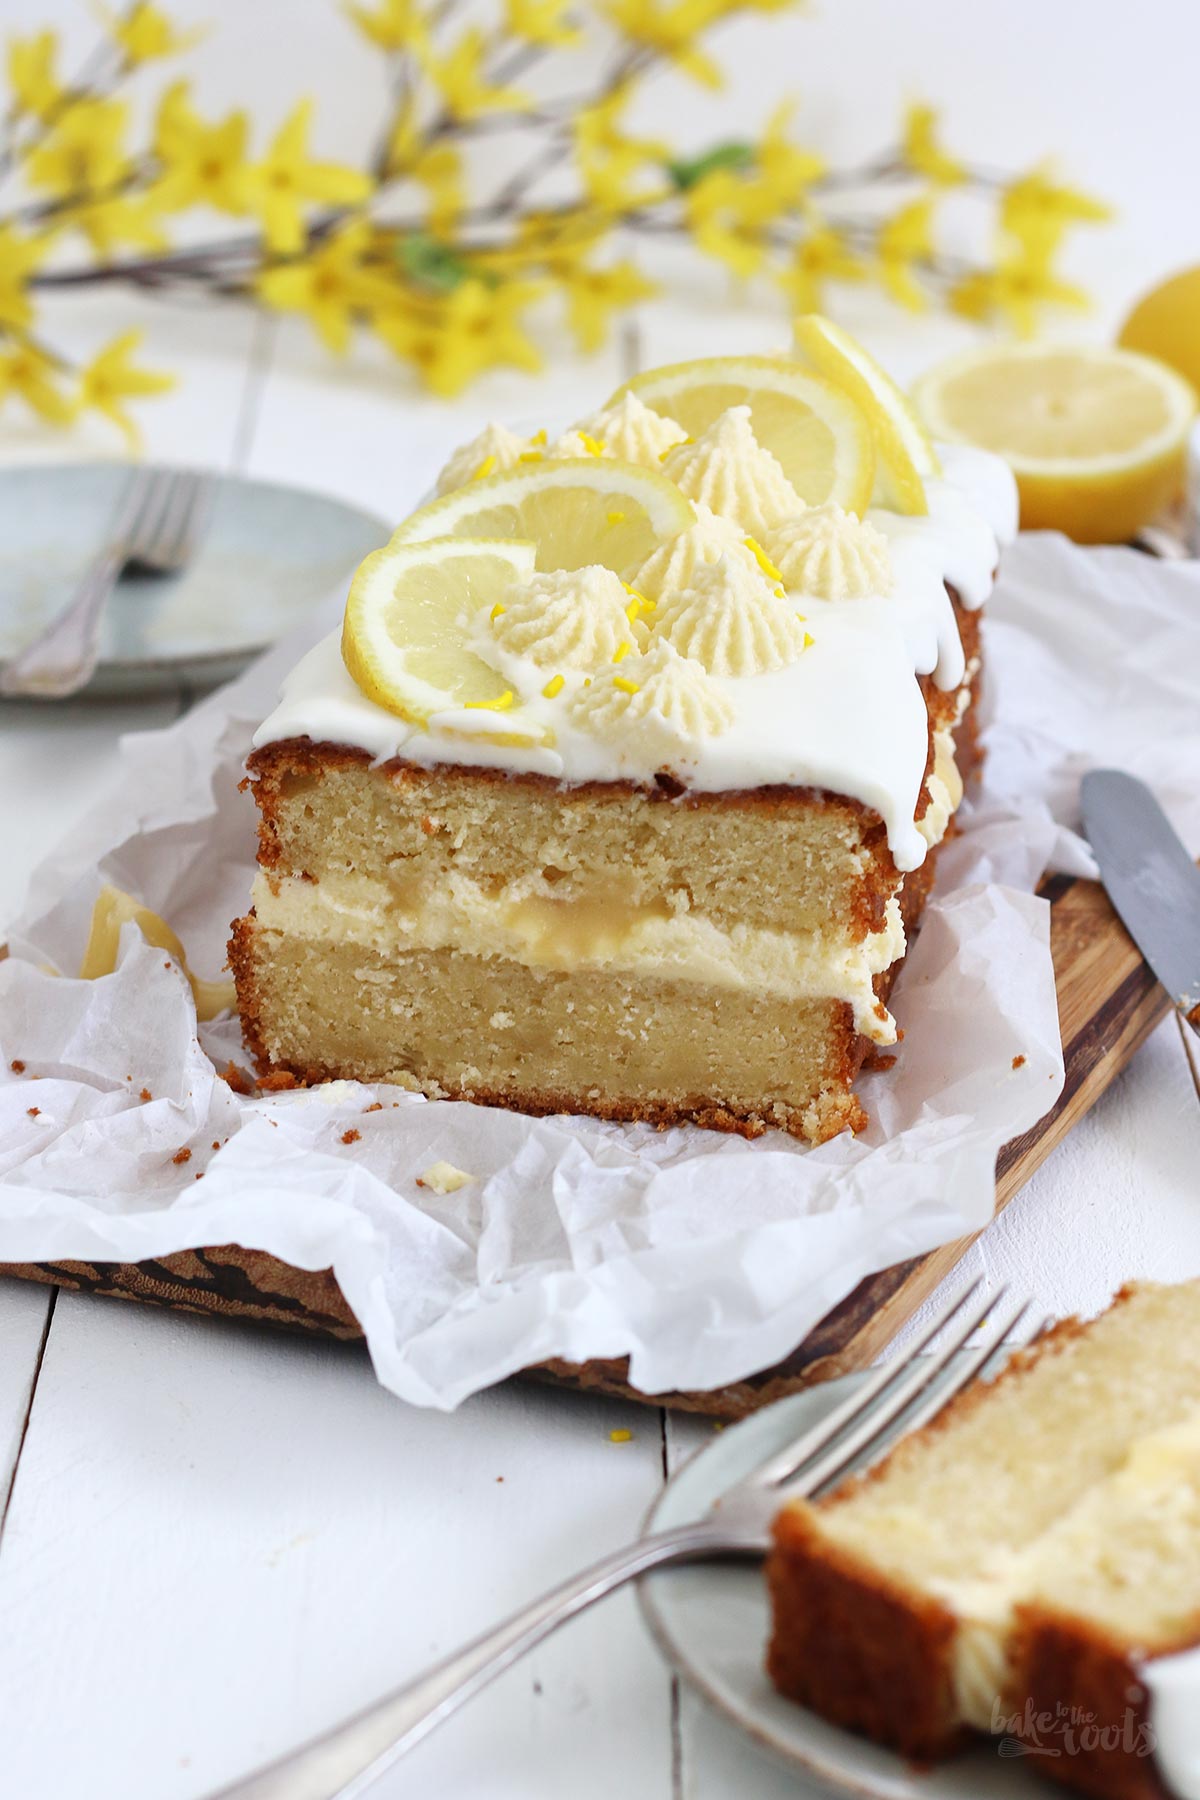 Buttermilk Lemon Pound Cake with Lemon Curd | Bake to the roots